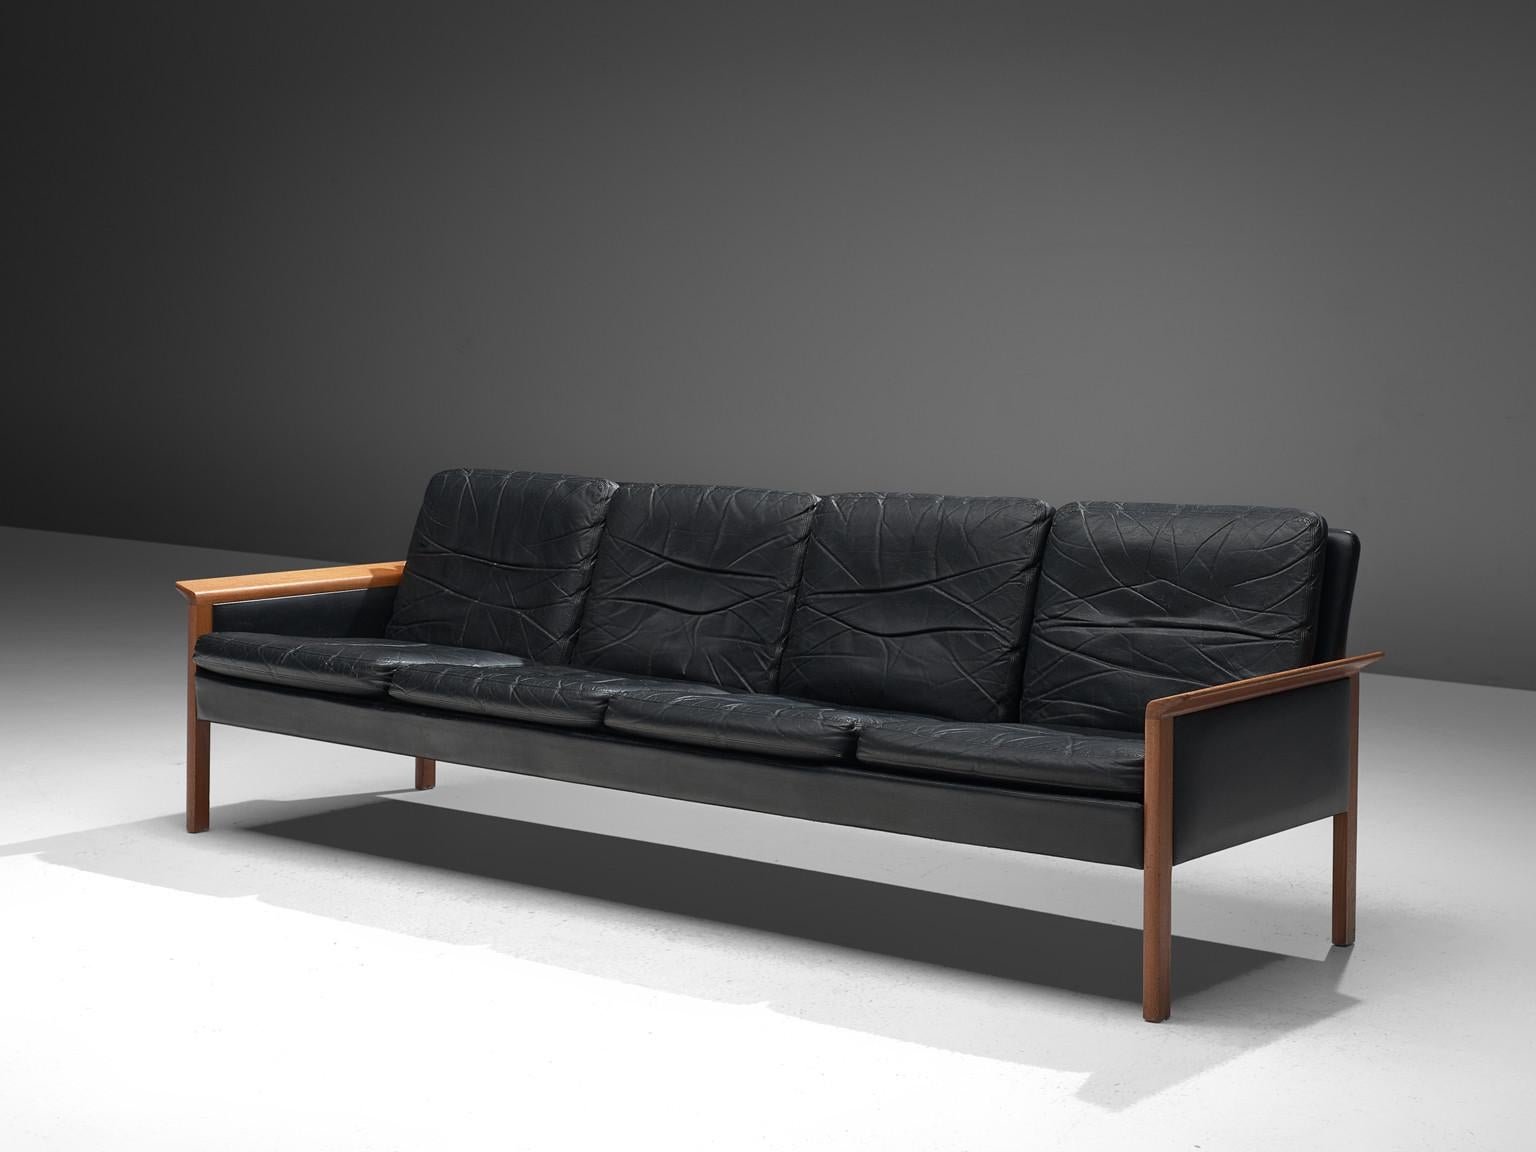 Hans Olsen for Brande Brande Møbelfabrik, leather, teak, Denmark, circa 1960

This leather four seat sofa is designed by the Dane Hans Olsen for Brande. The sofa is executed in black leather that has beautifully patinated over the years.  The sofa